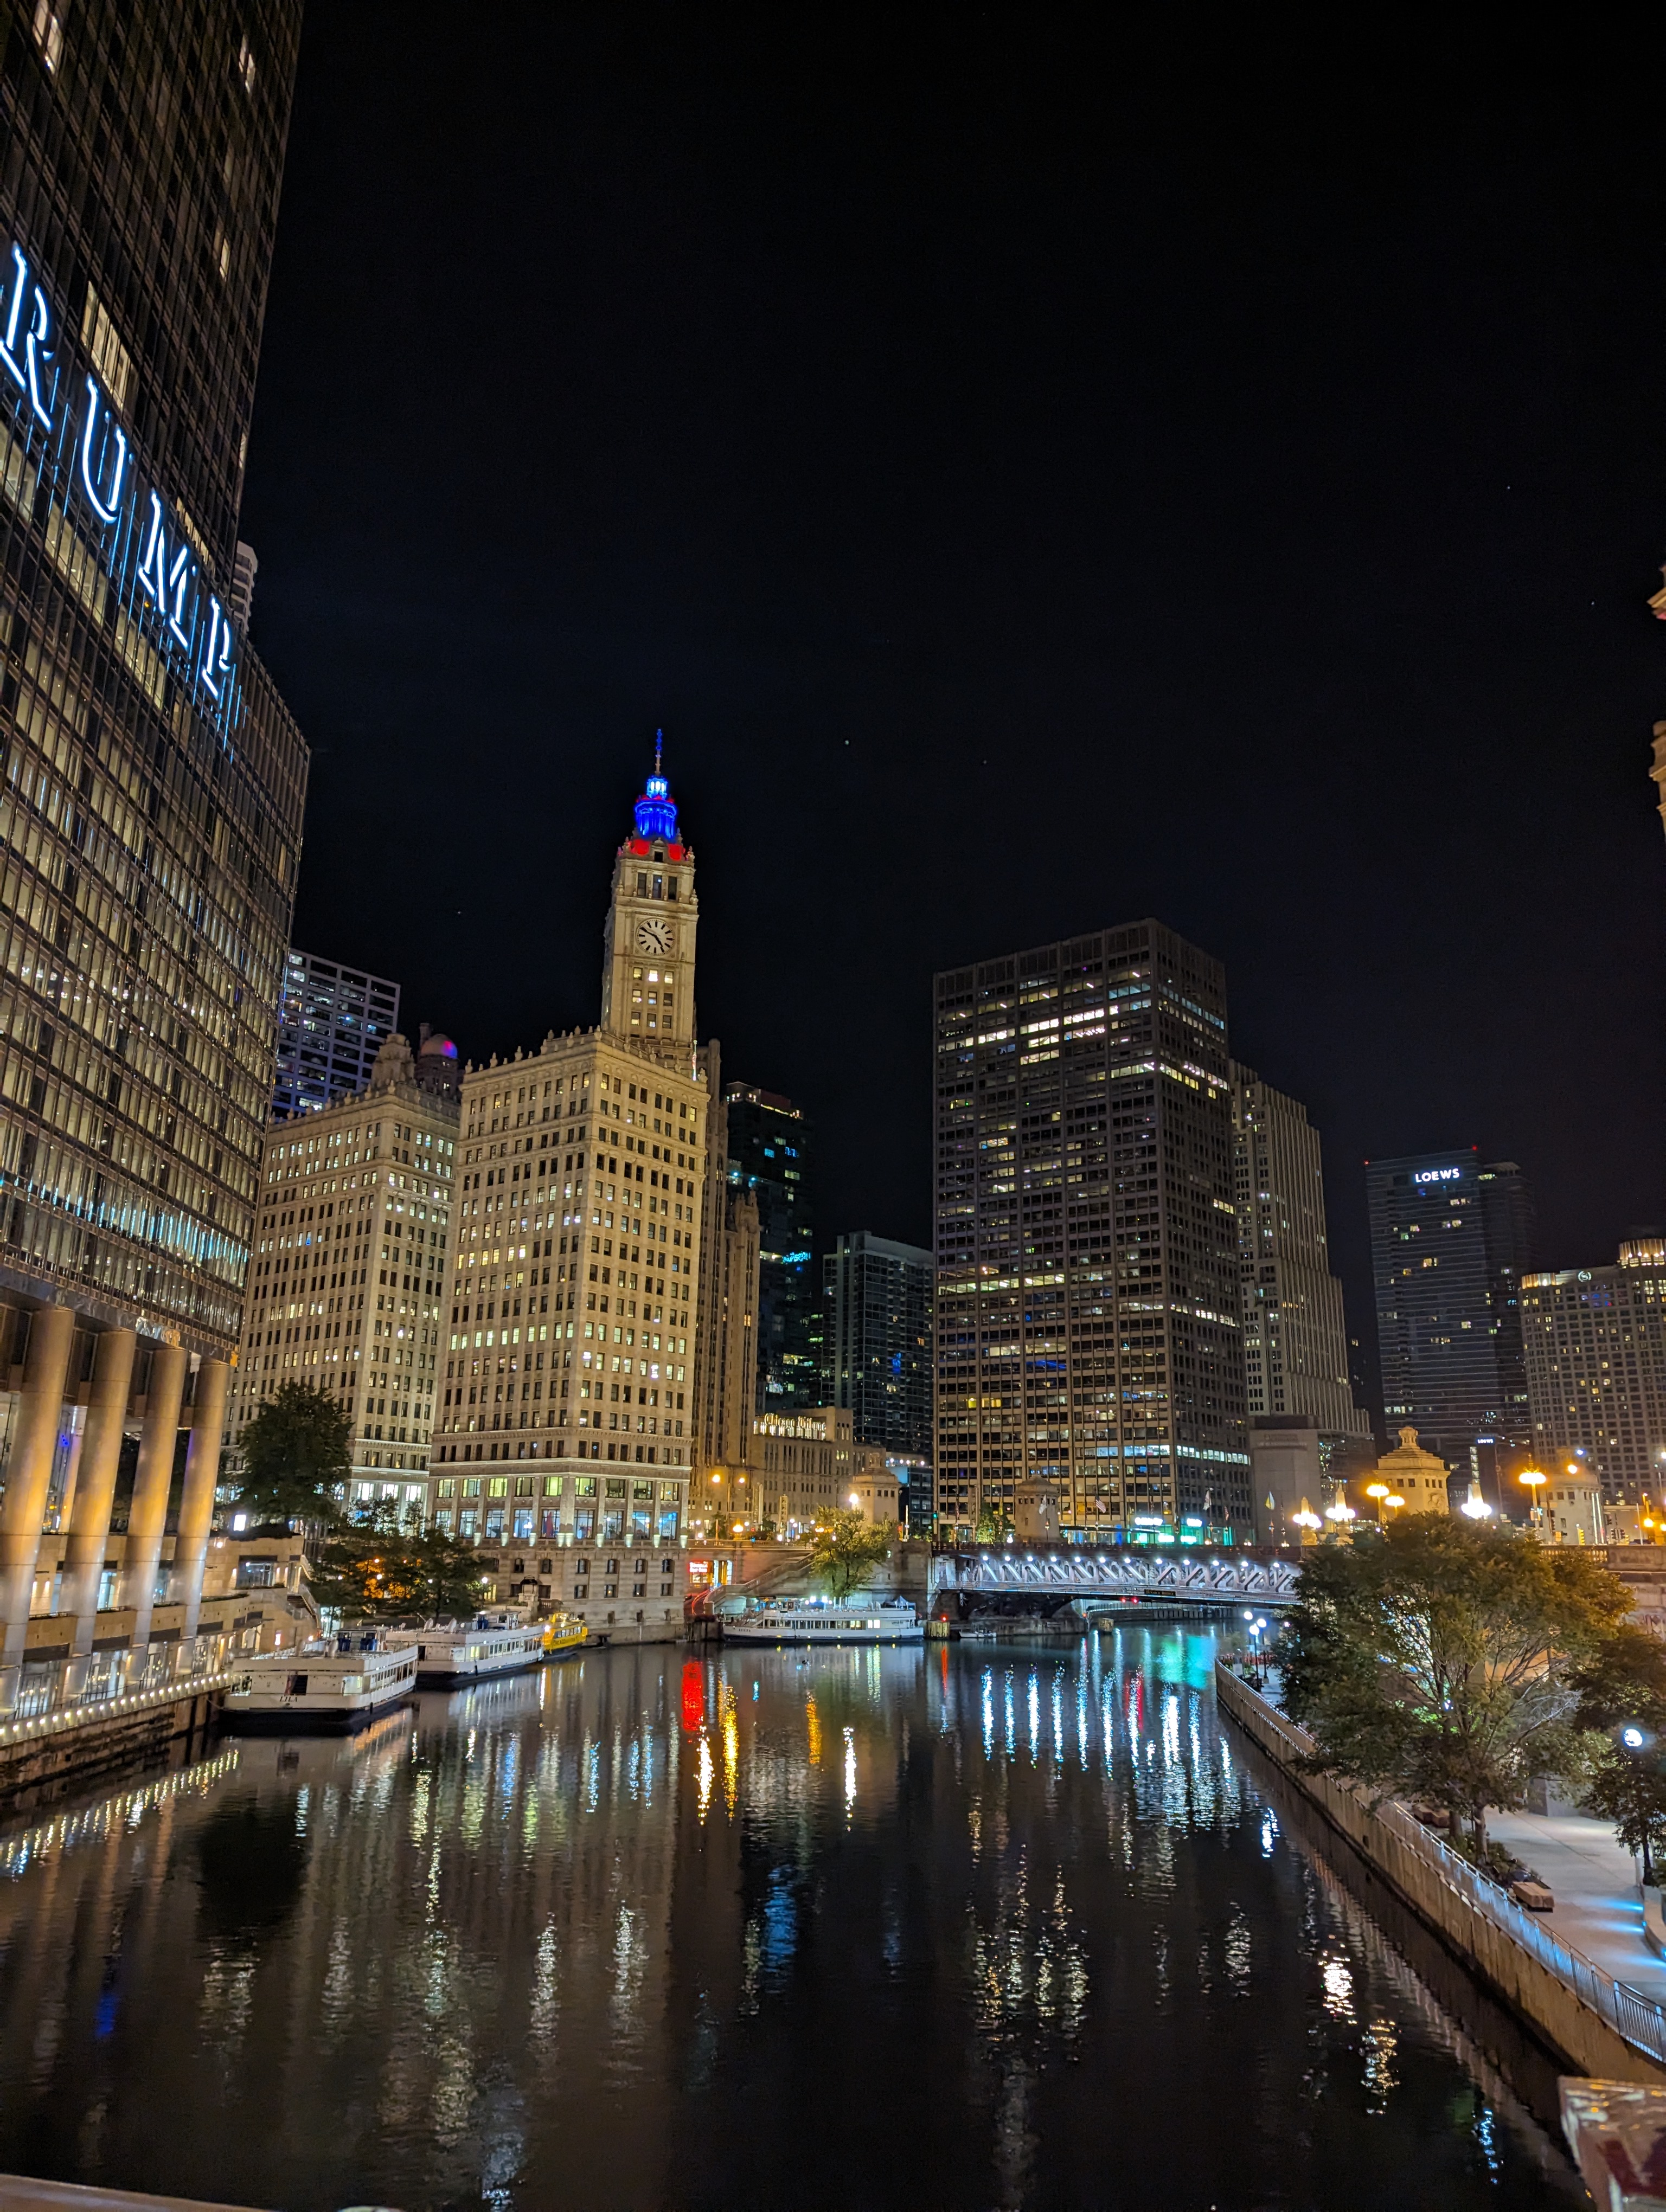 The chicago river as seen from the Wabash street bridge. A riverwalk with trees and benches can be seen from the right. Immediately down the river are Wendella's at trump tower in the wrigley building, with 4 boats being docket. It is nigh time and the top of the Wrigley building is showing blue and red for the colors of the American flag.